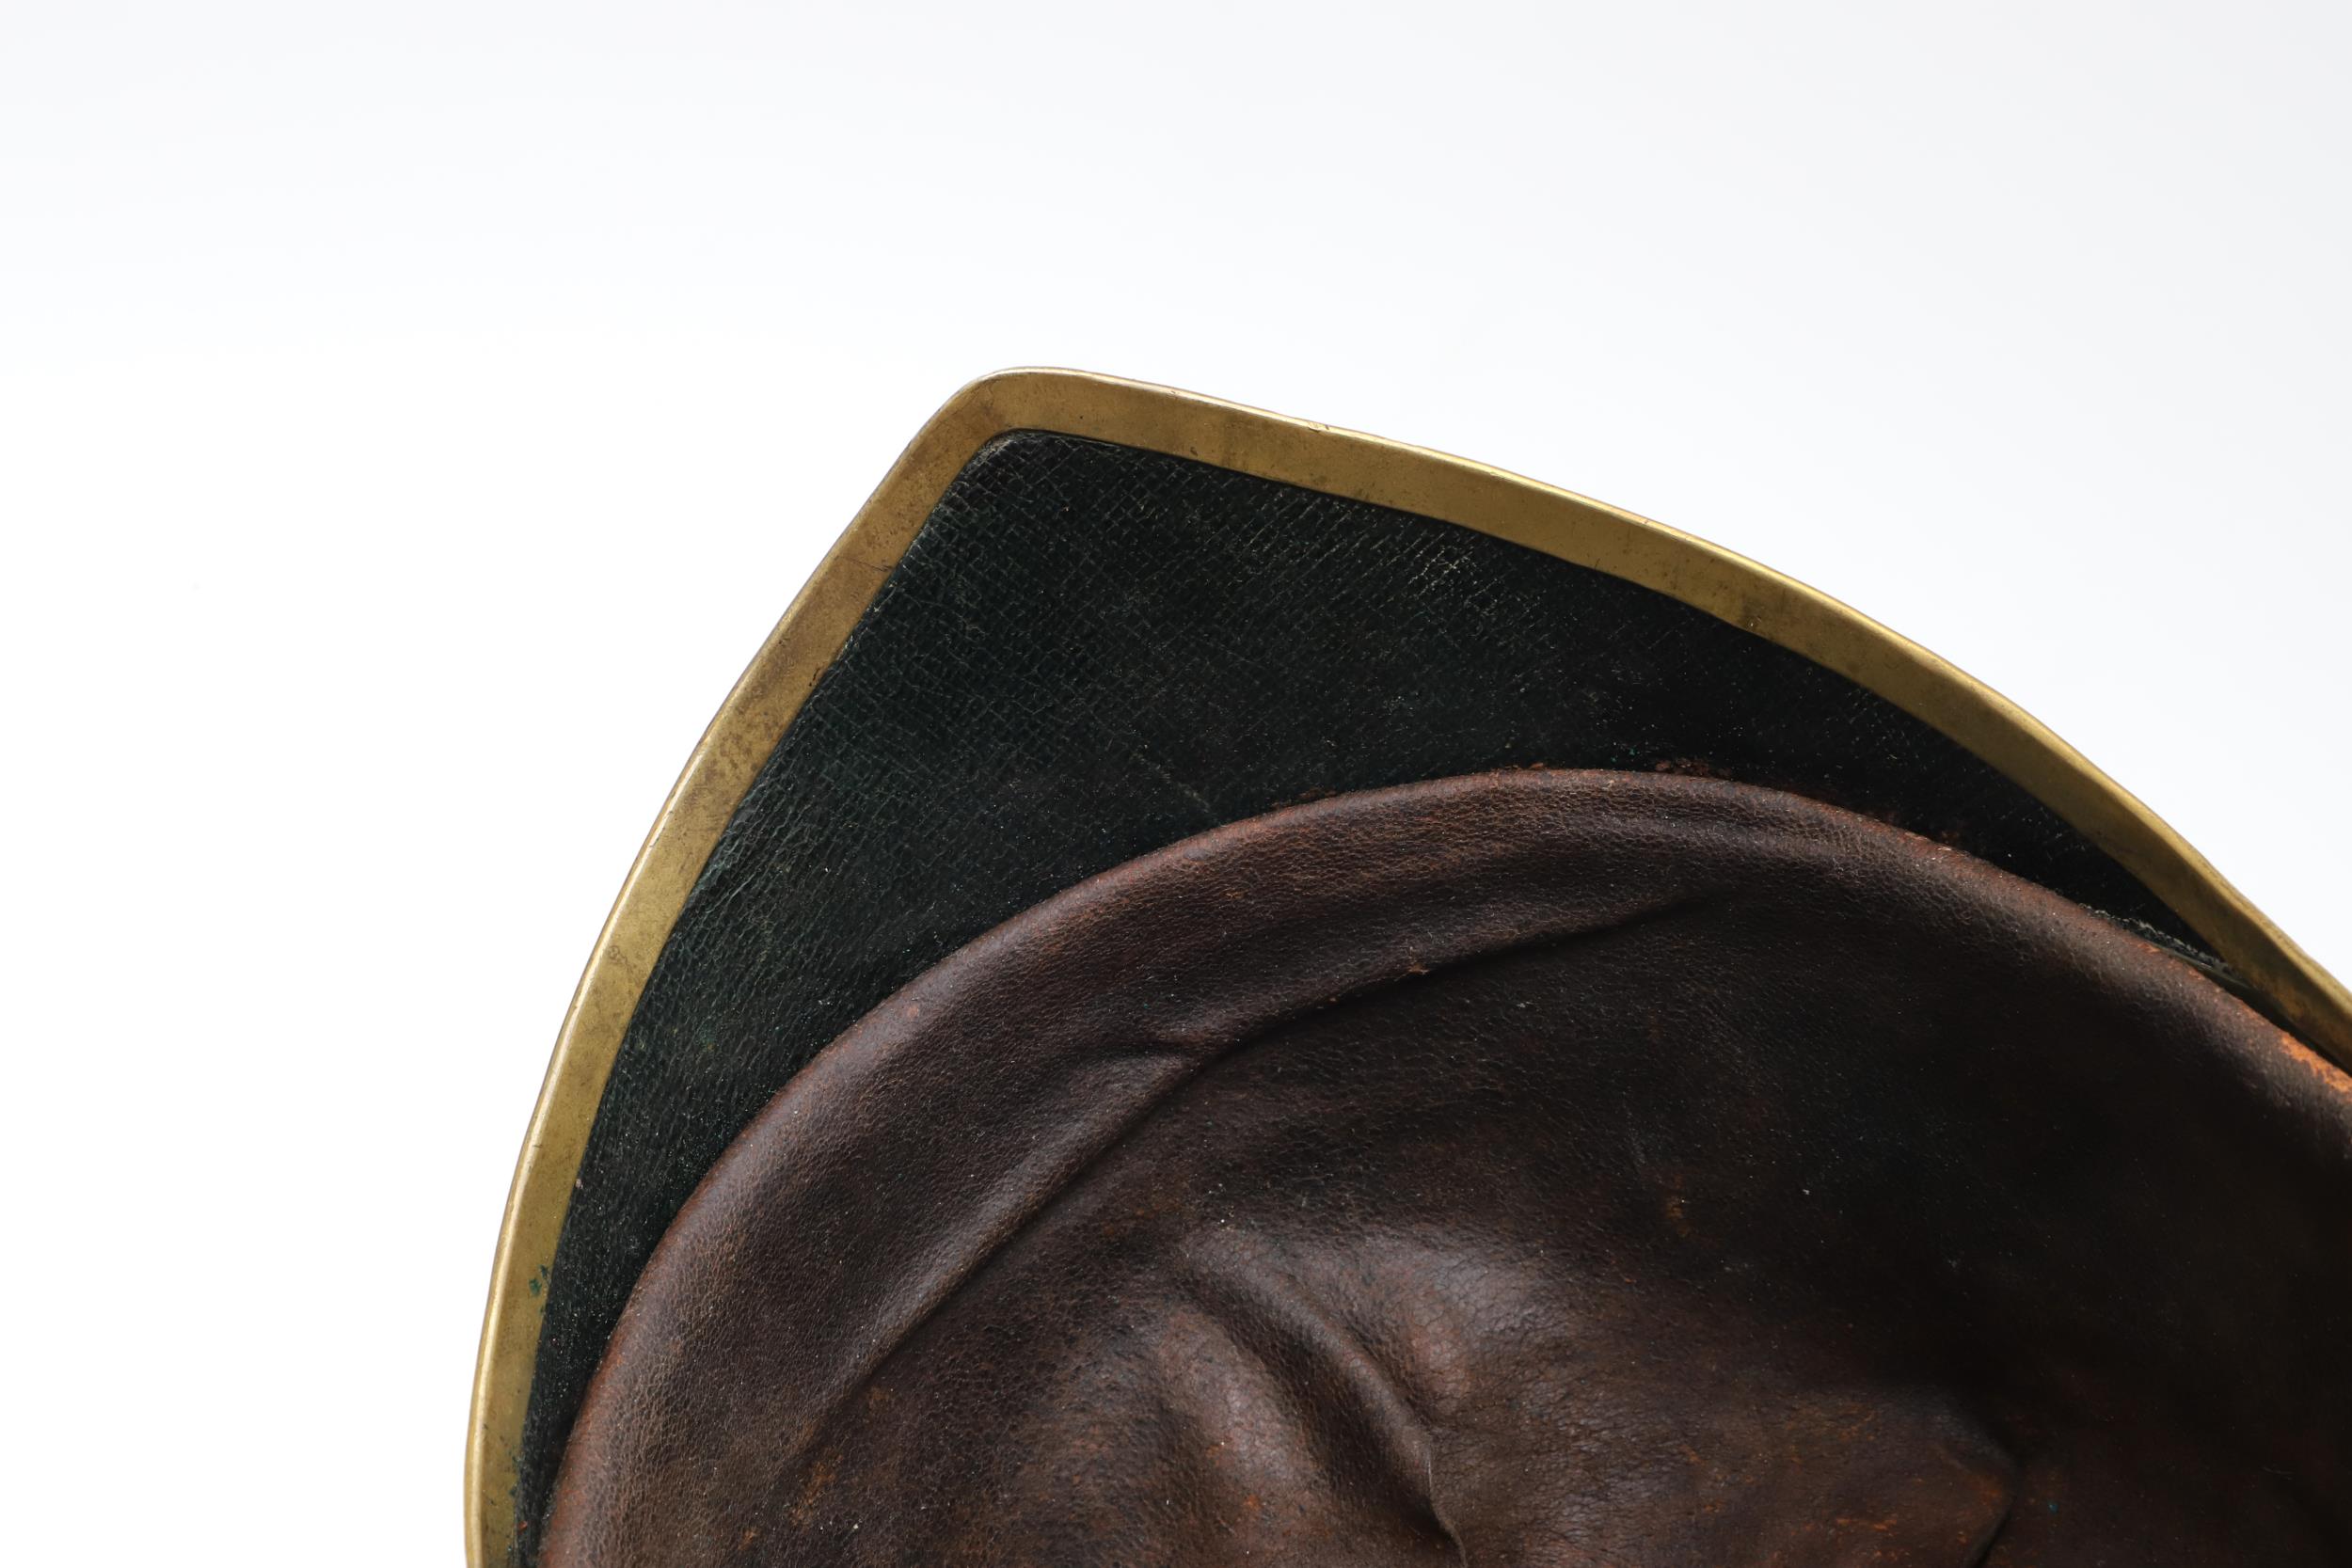 A 5TH DRAGOON GUARDS 1871 PATTERN HELMET. - Image 13 of 15